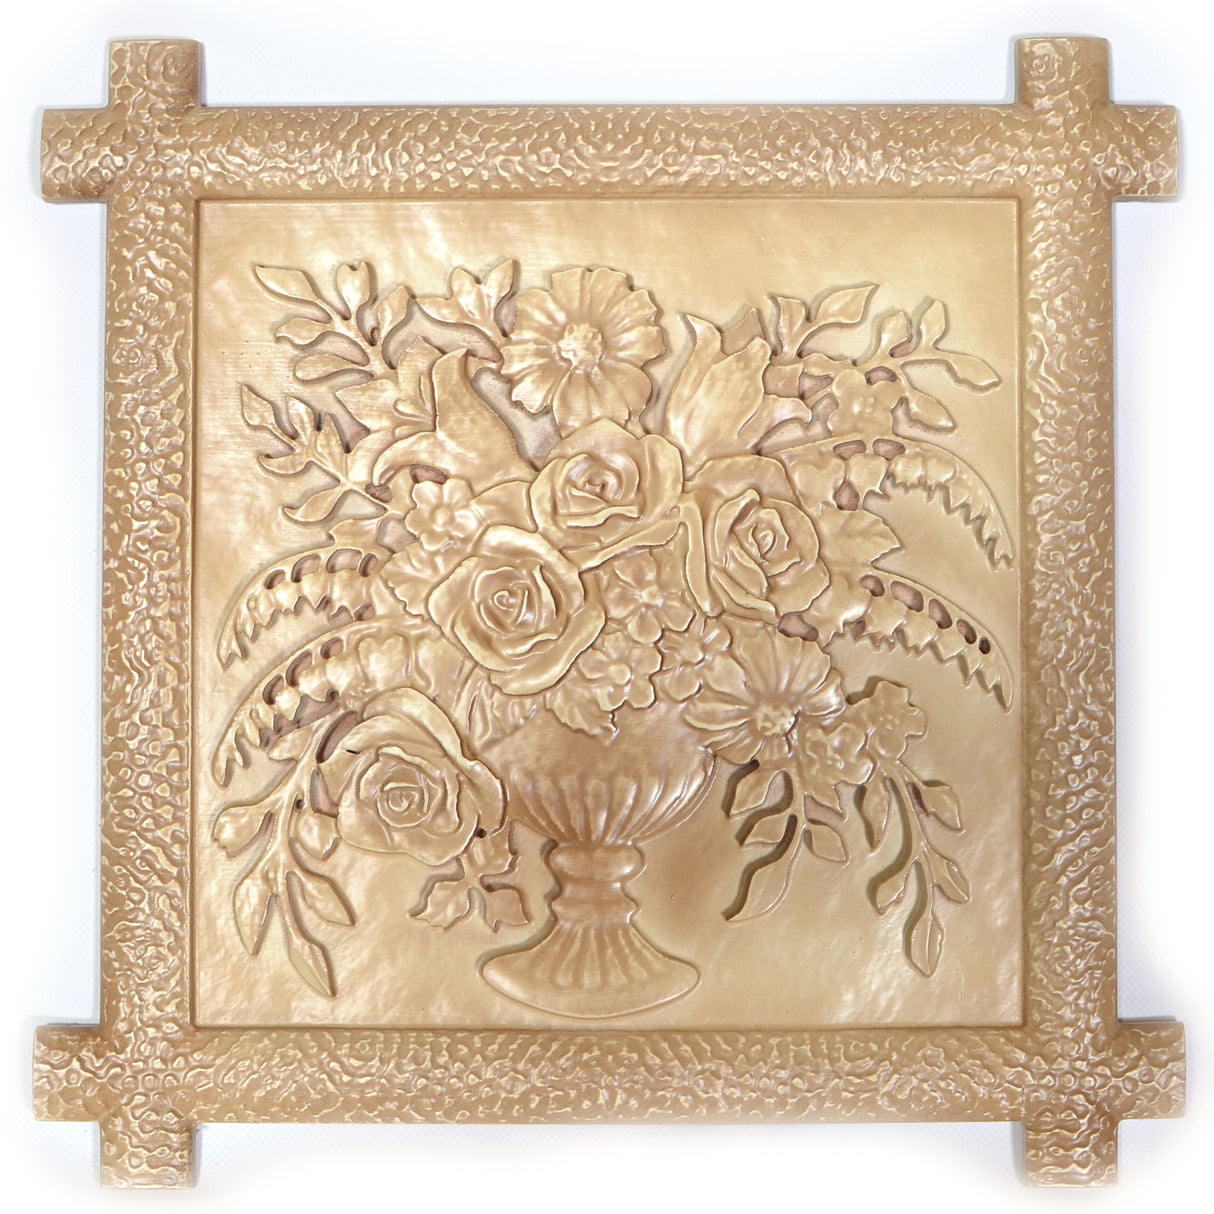 The Flower Bouquet Ukrainian Beech Wood Carved Plaque 16 Inches White in Brown color, Square shape